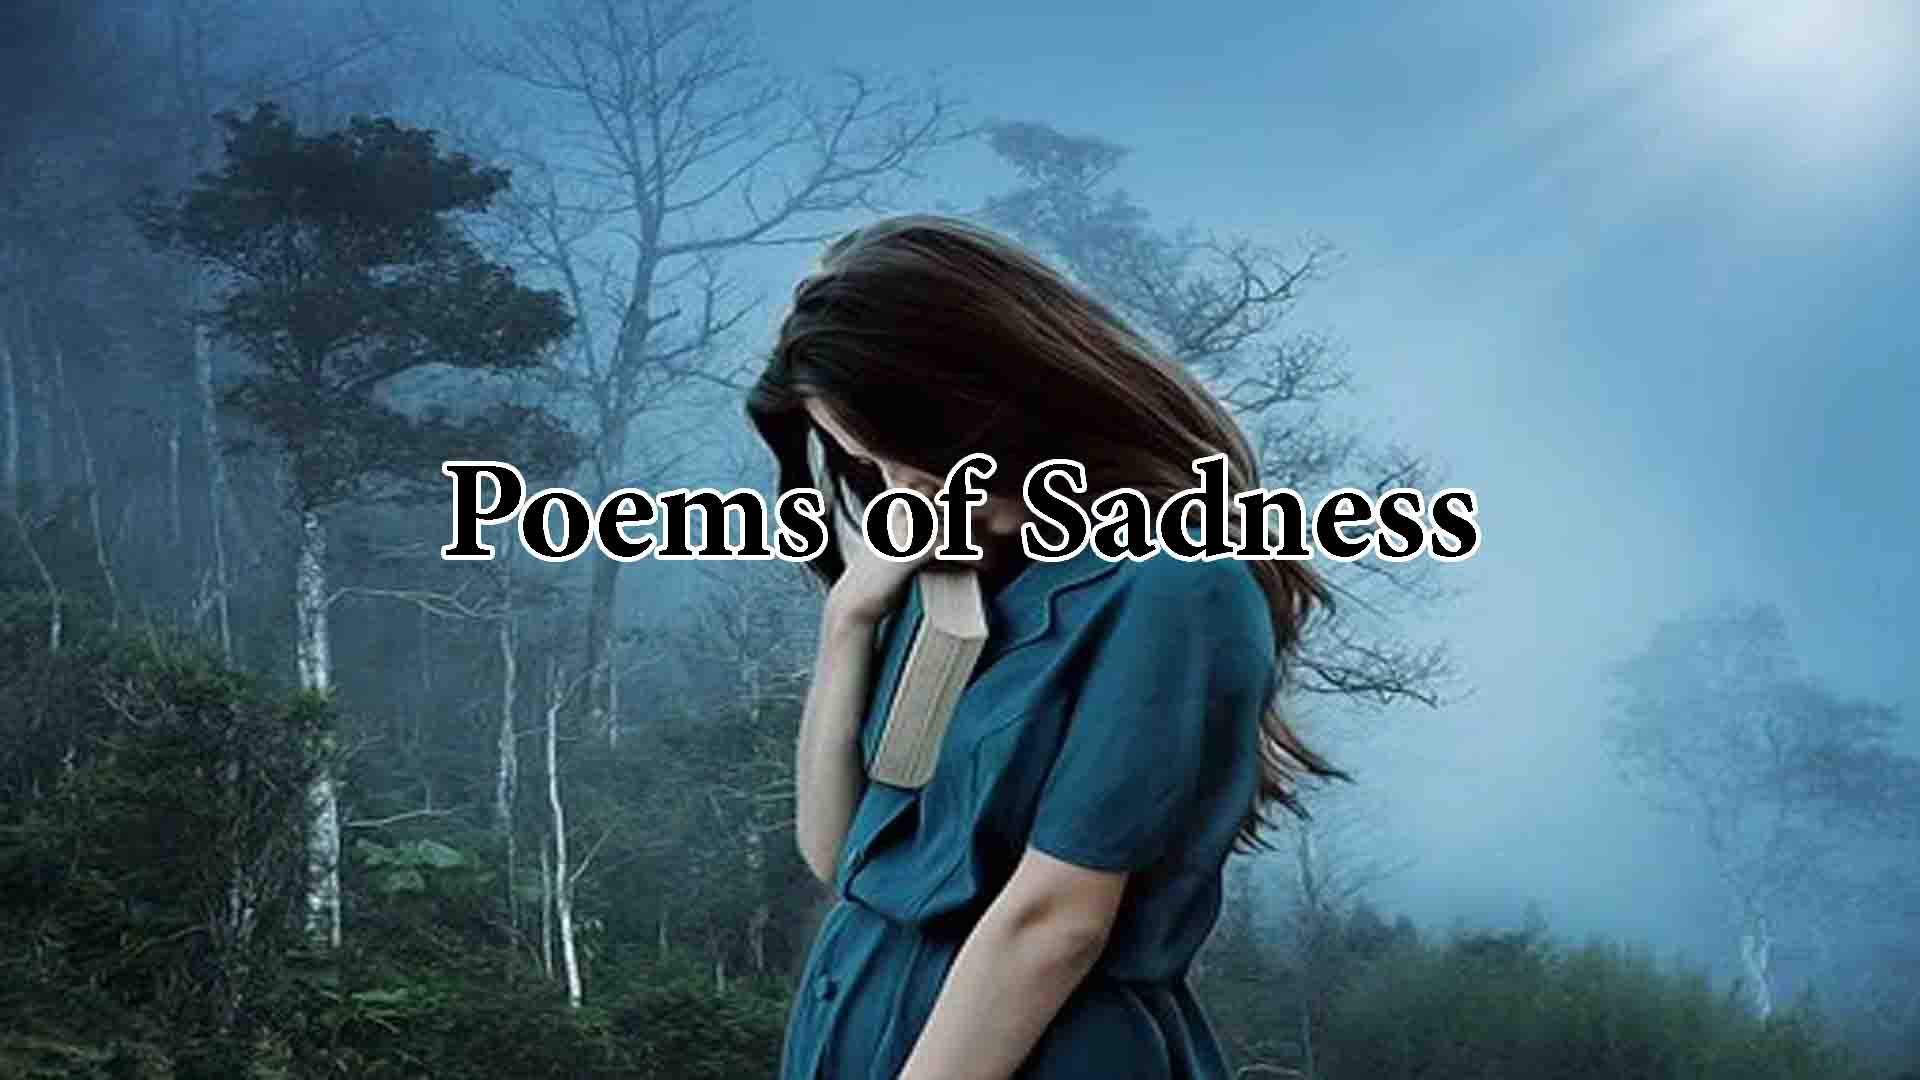 Poems of Sadness | Sad Poem About Love and Pain